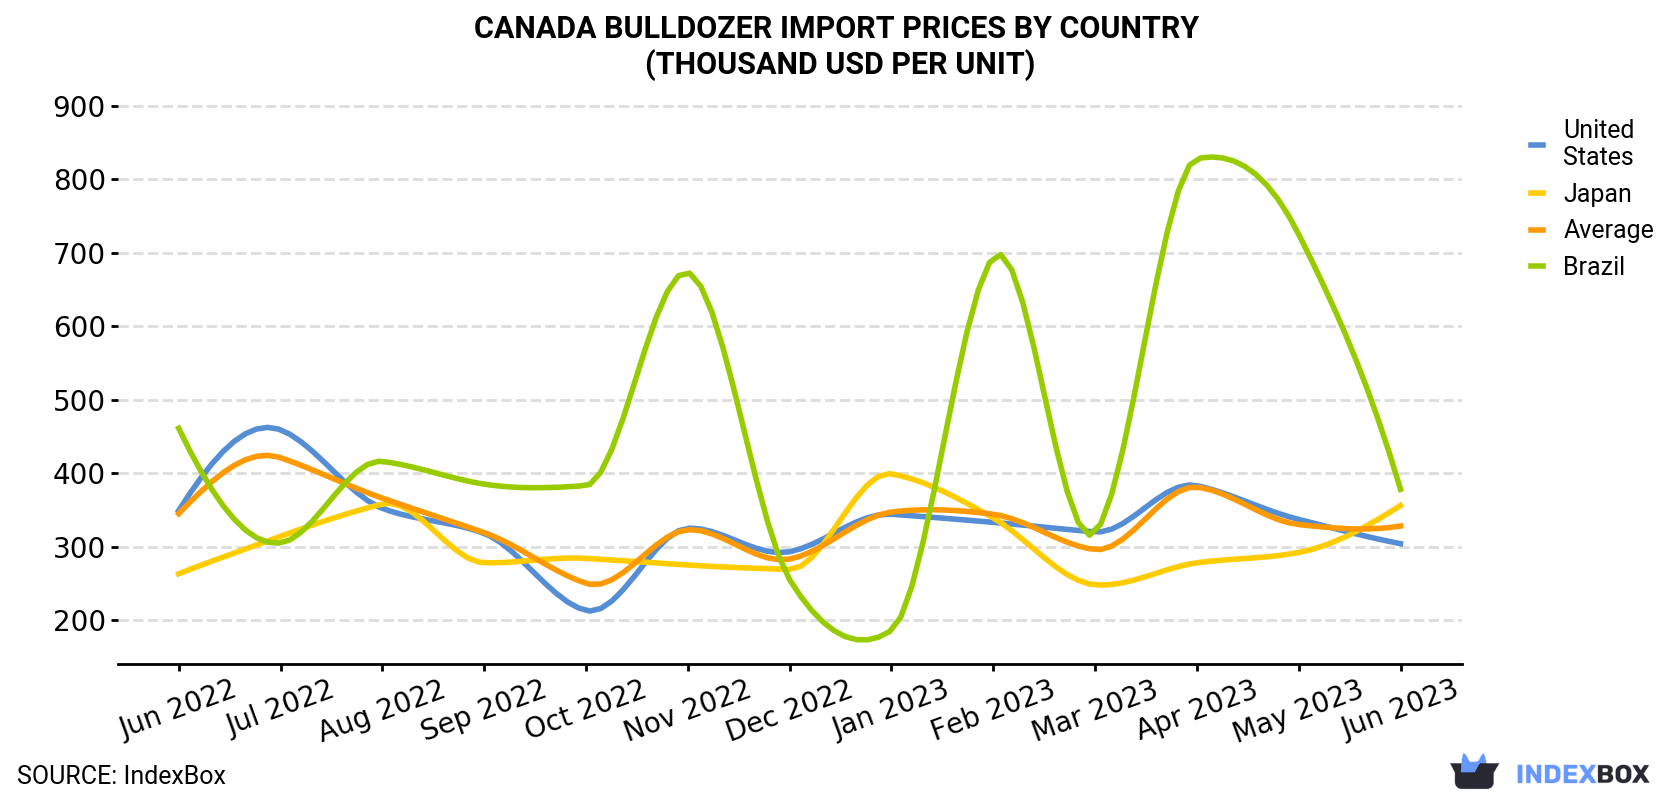 Canada Bulldozer Import Prices By Country (Thousand USD Per Unit)